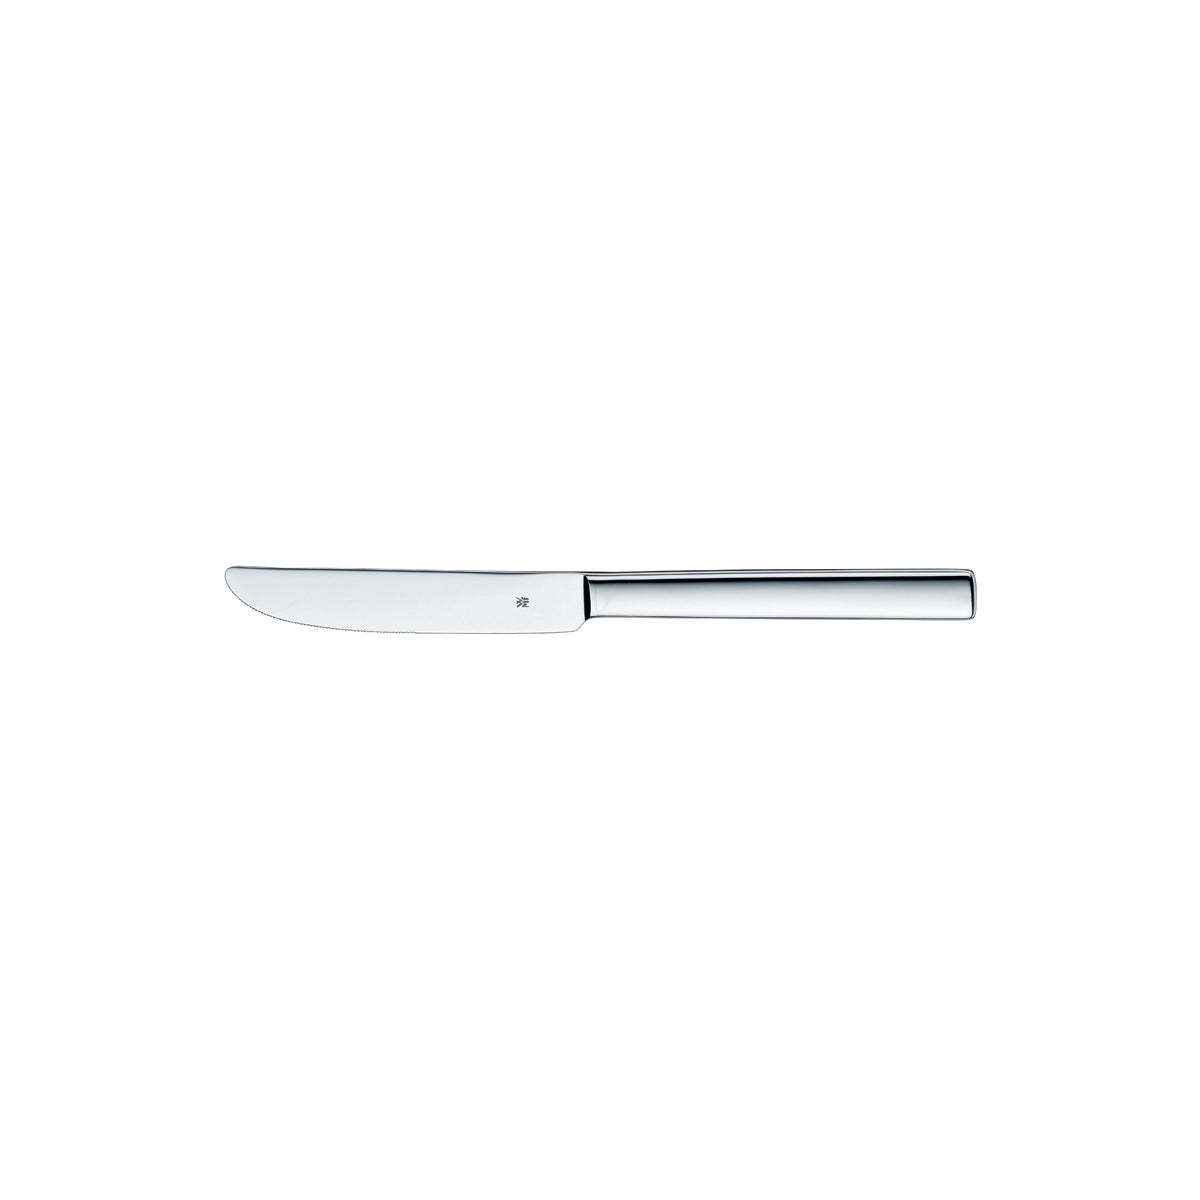 12.5303.6047 WMF Unic Table Knife - Hollow Handle Stainless Steel Tomkin Australia Hospitality Supplies